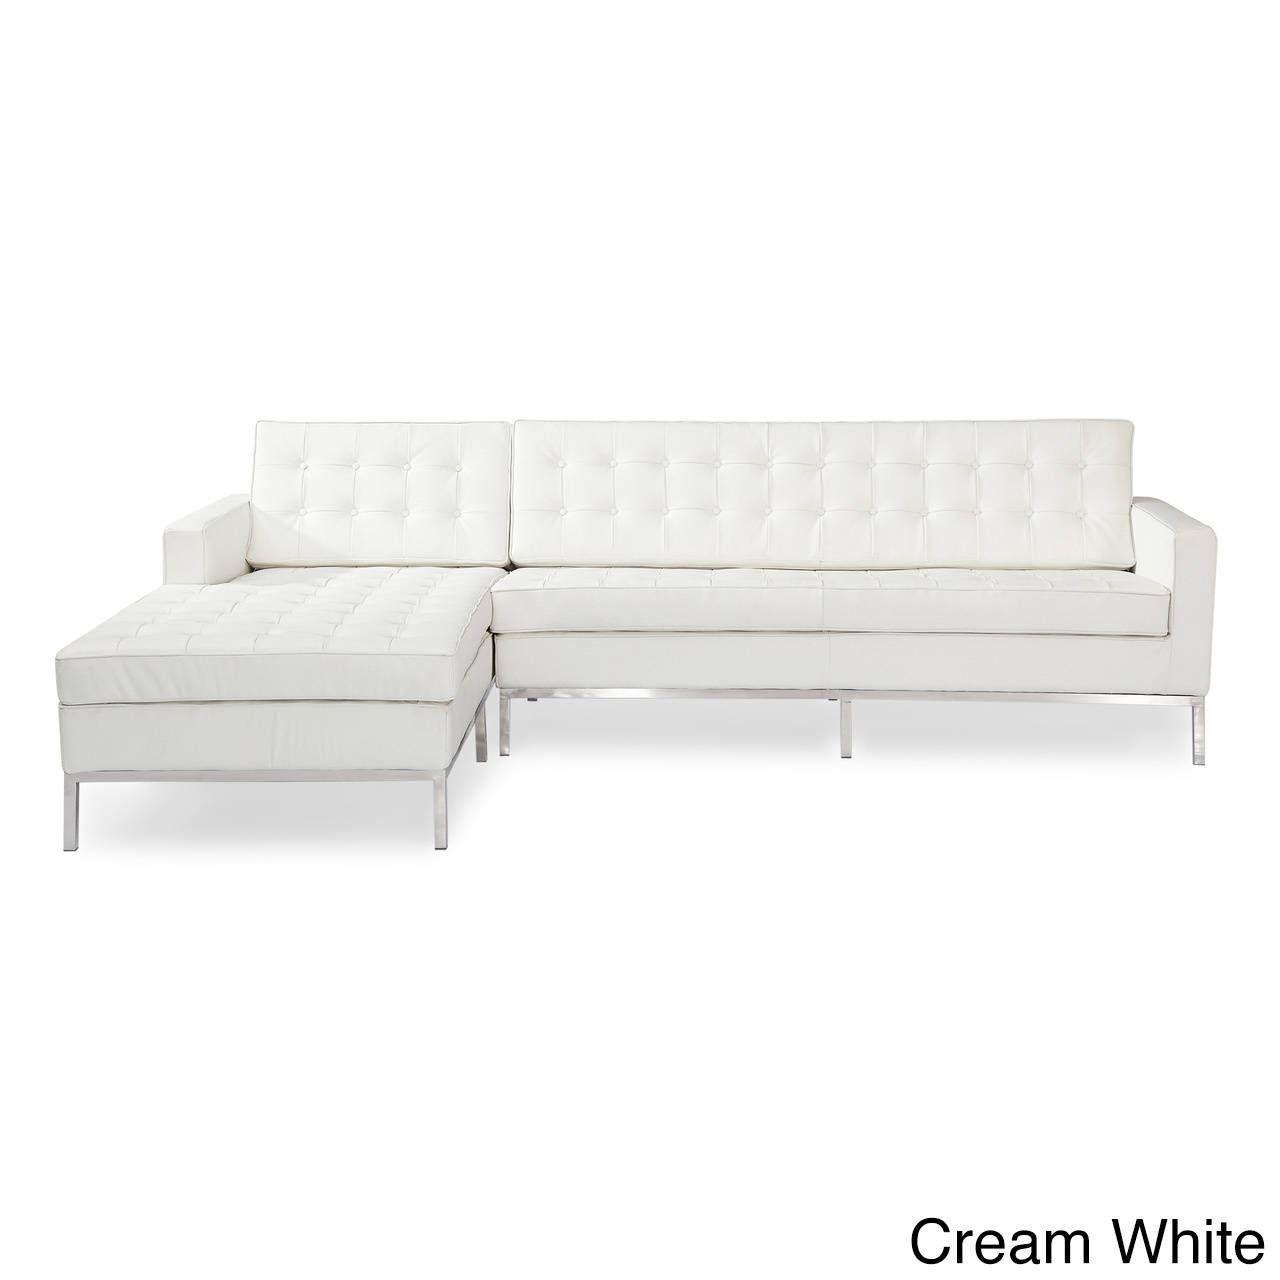 Florence Knoll Style Sofa Sectional Left Cream White 100 Premium Throughout Florence Knoll Style Sofas (View 20 of 25)